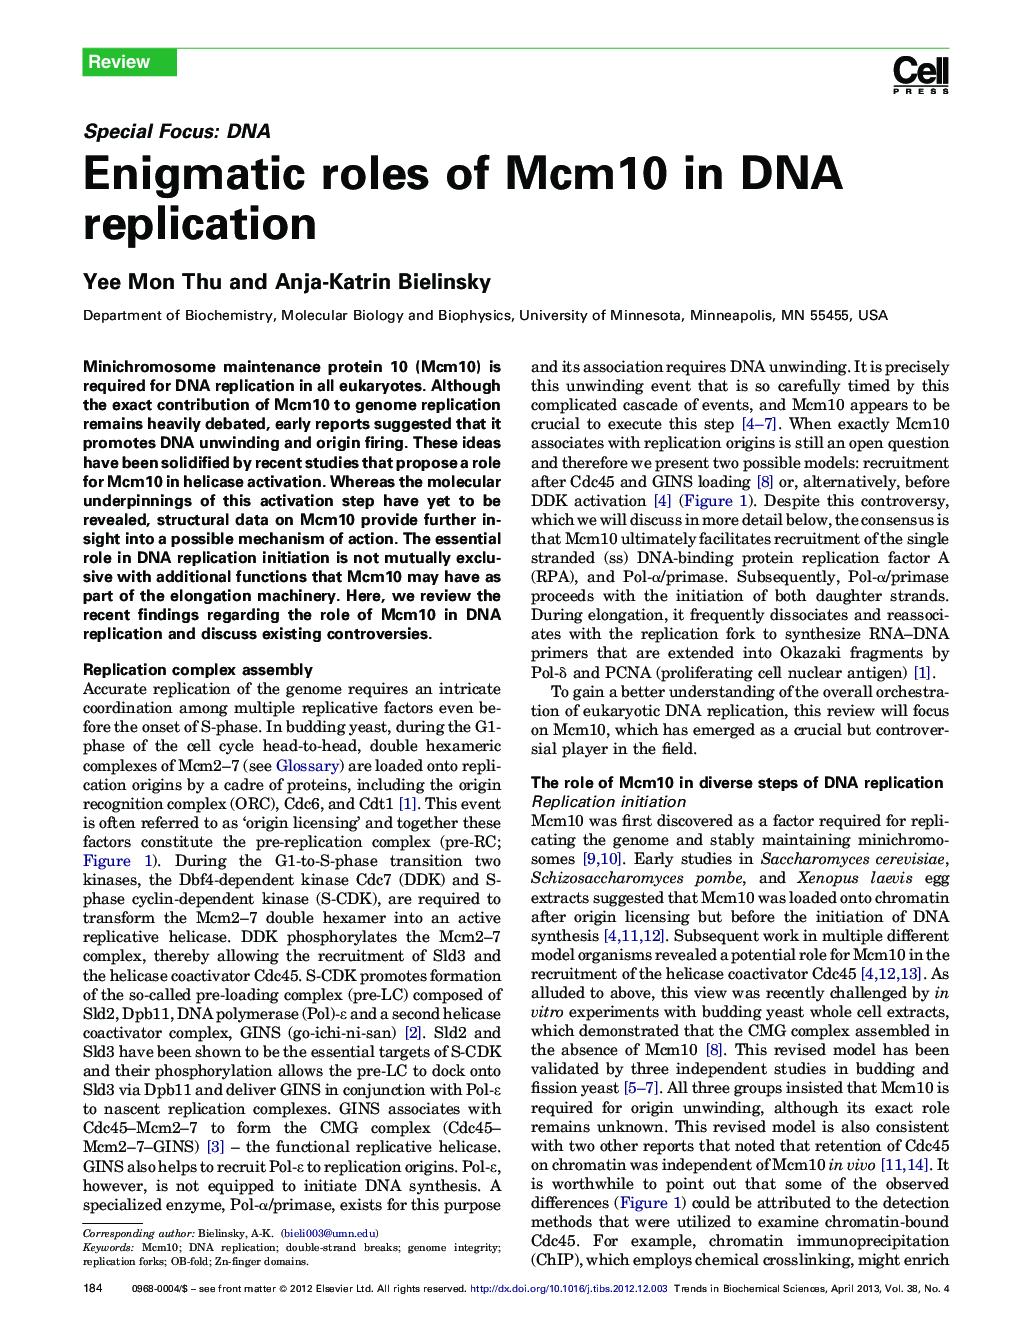 Enigmatic roles of Mcm10 in DNA replication